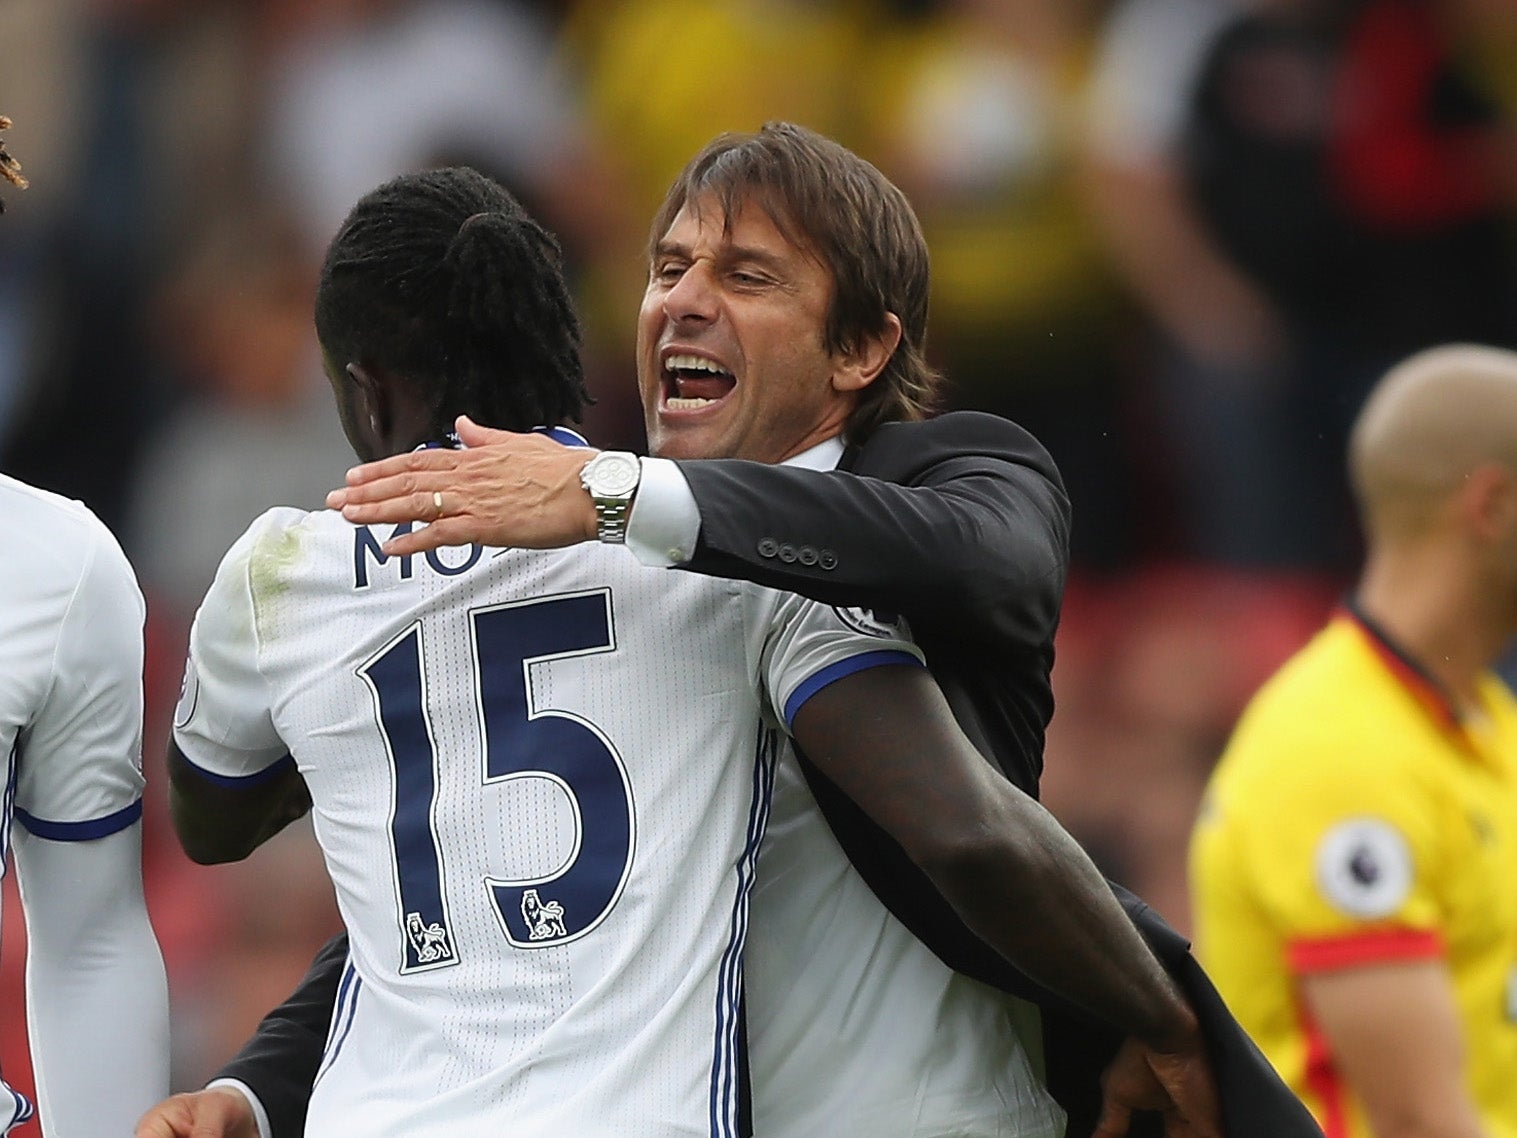 Moses' workrate and commitment to Conte's idea have seen him flourish